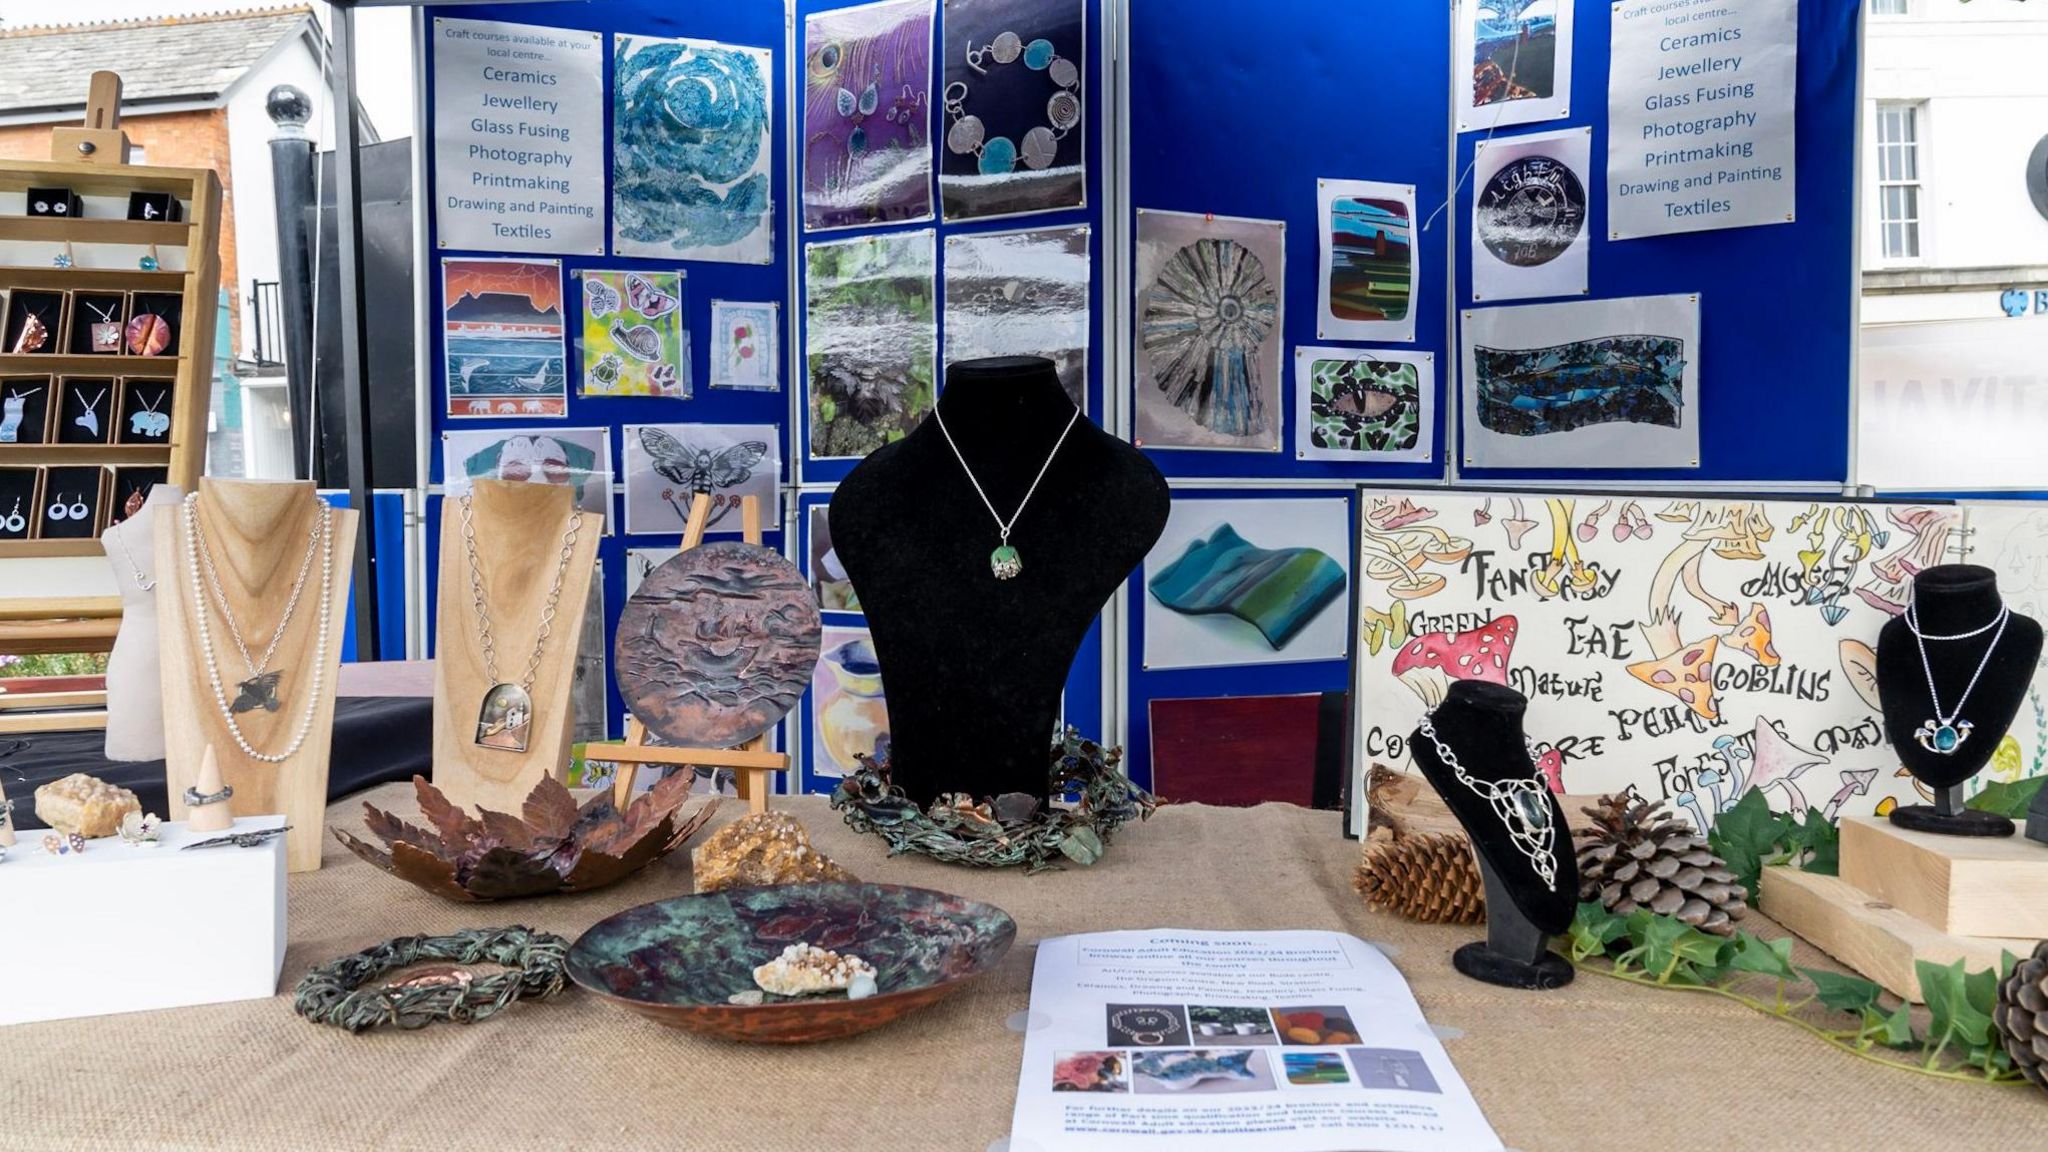 Products produced by students including jewellery and textiles on display